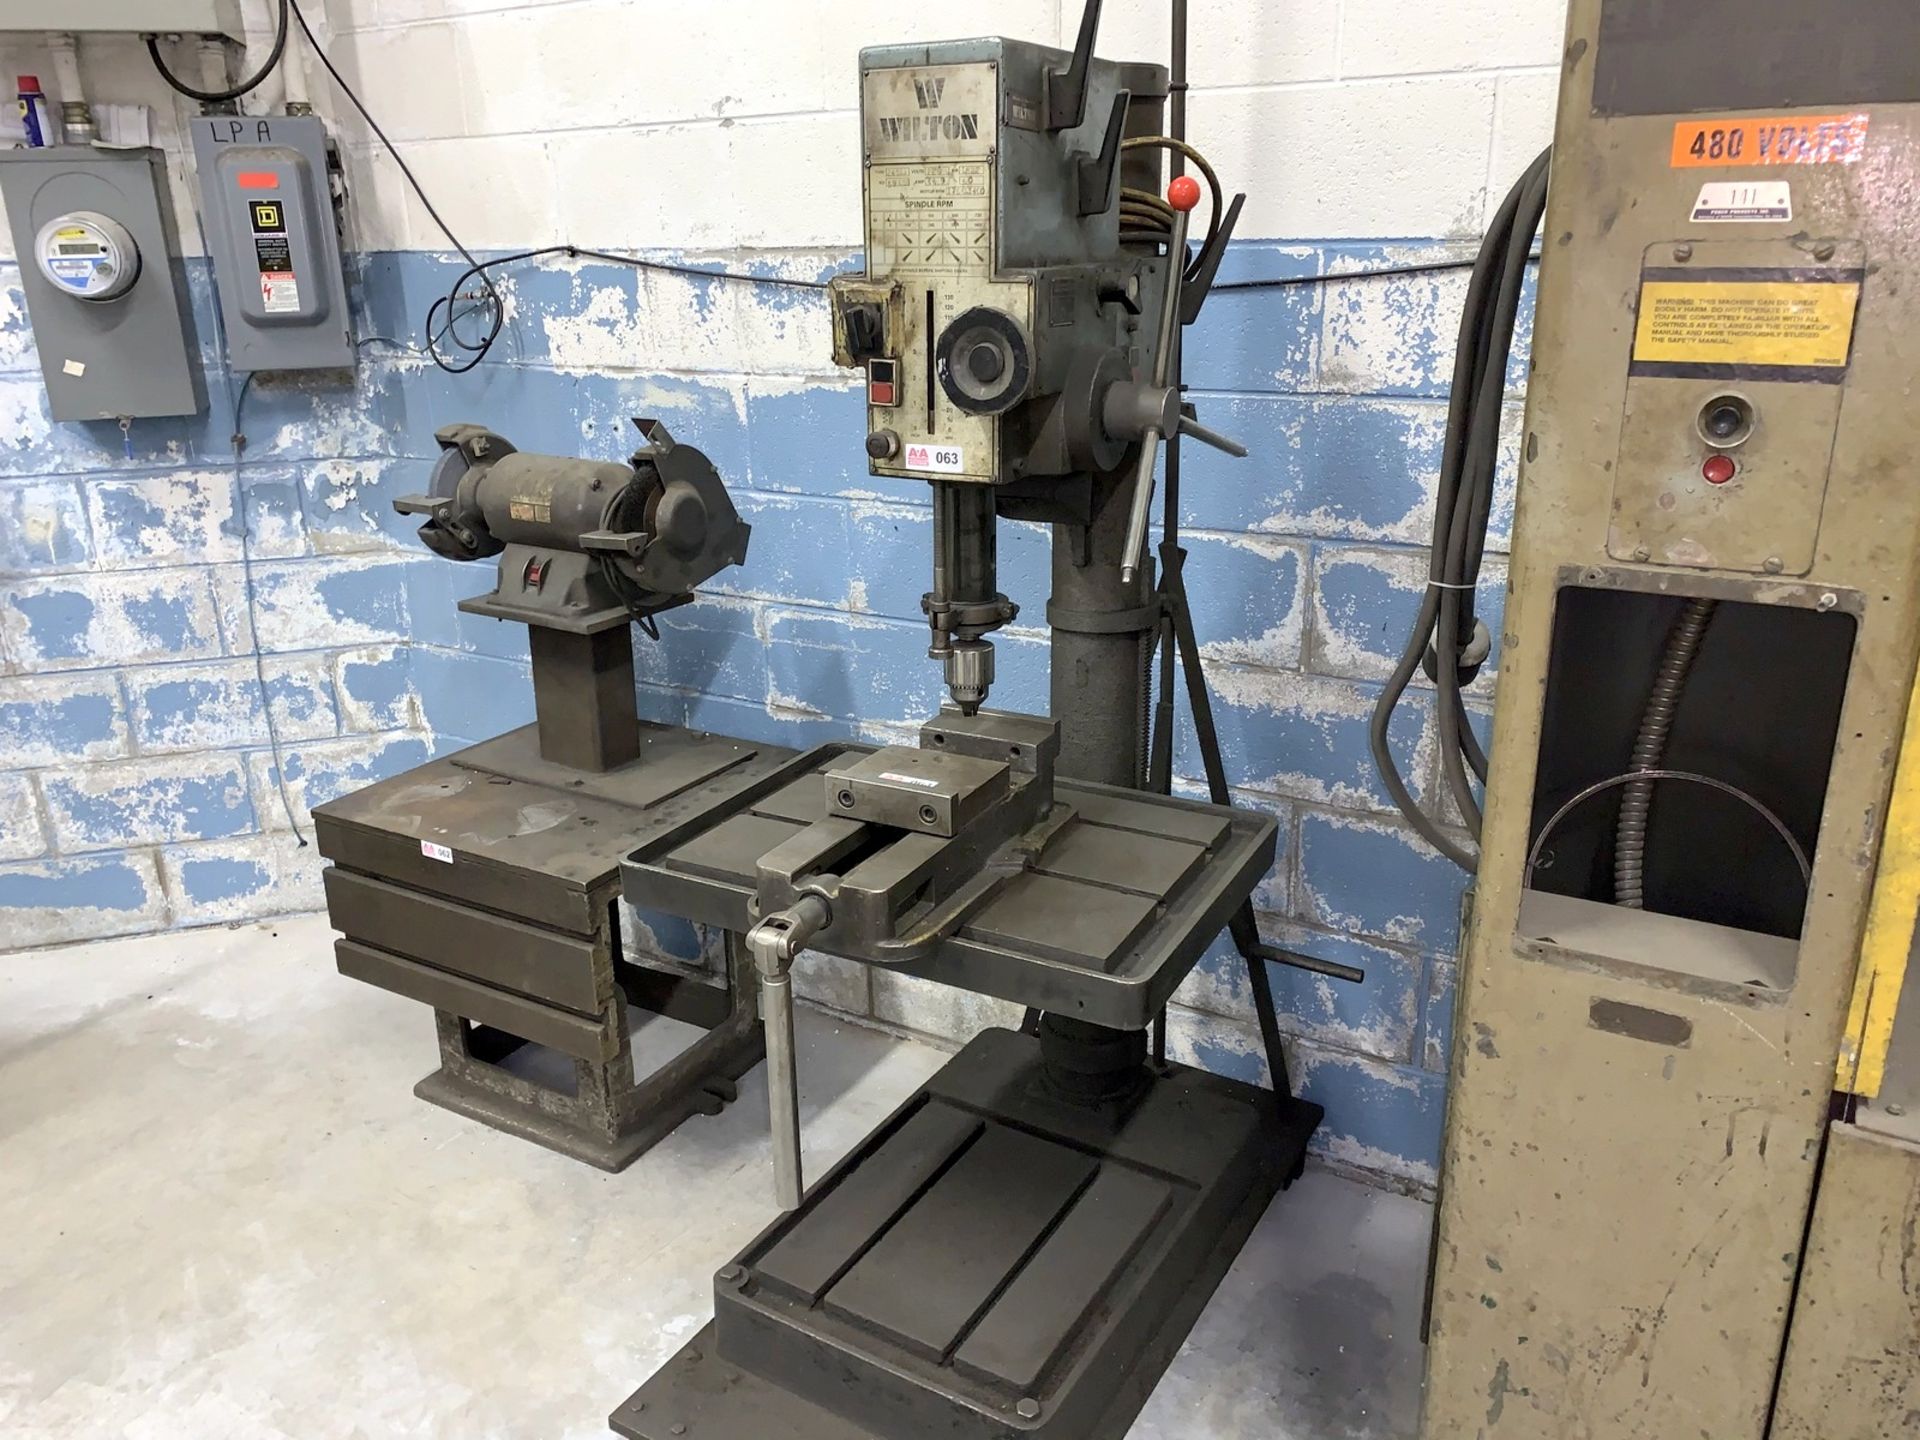 Wilton Mdl. 24513 Drill Press, Pedestal Mounted, 85 to 1460 RPM, 15" x 21" T-Slot Table with 1" Drip - Image 2 of 5